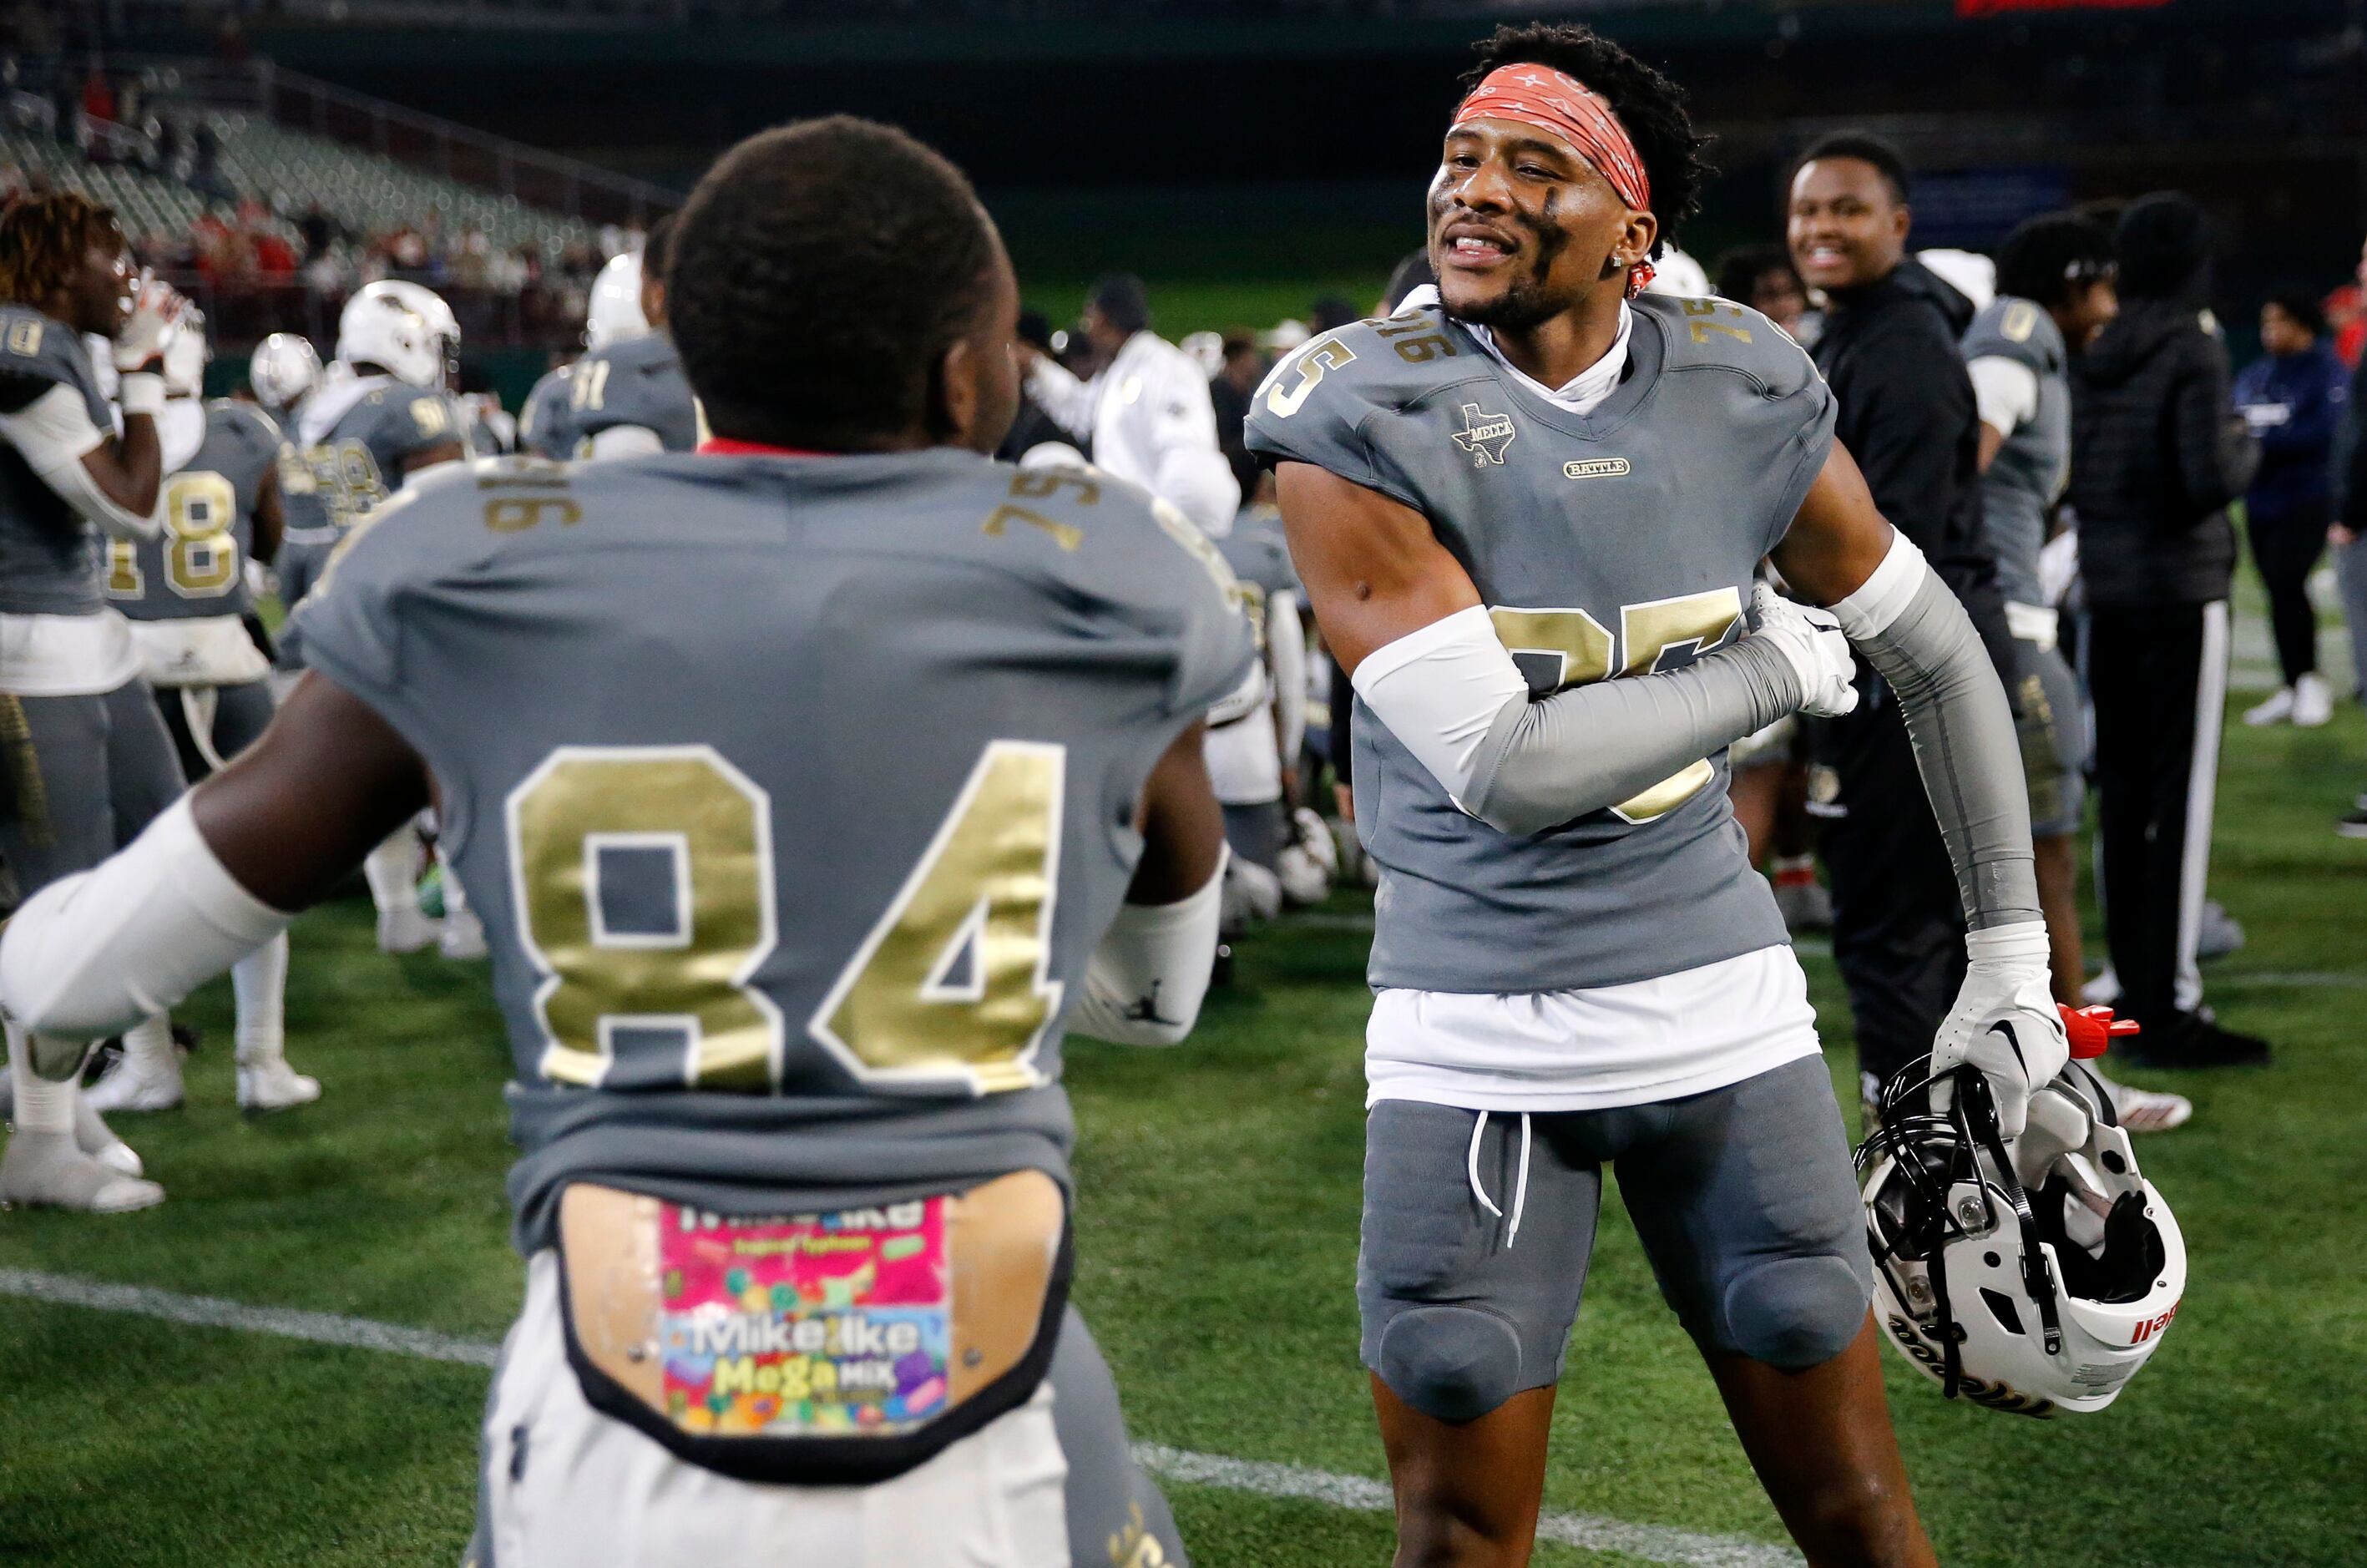 South Oak Cliff football players Joshua Manley (right) and Jordan Mayes (84) celebrate their...